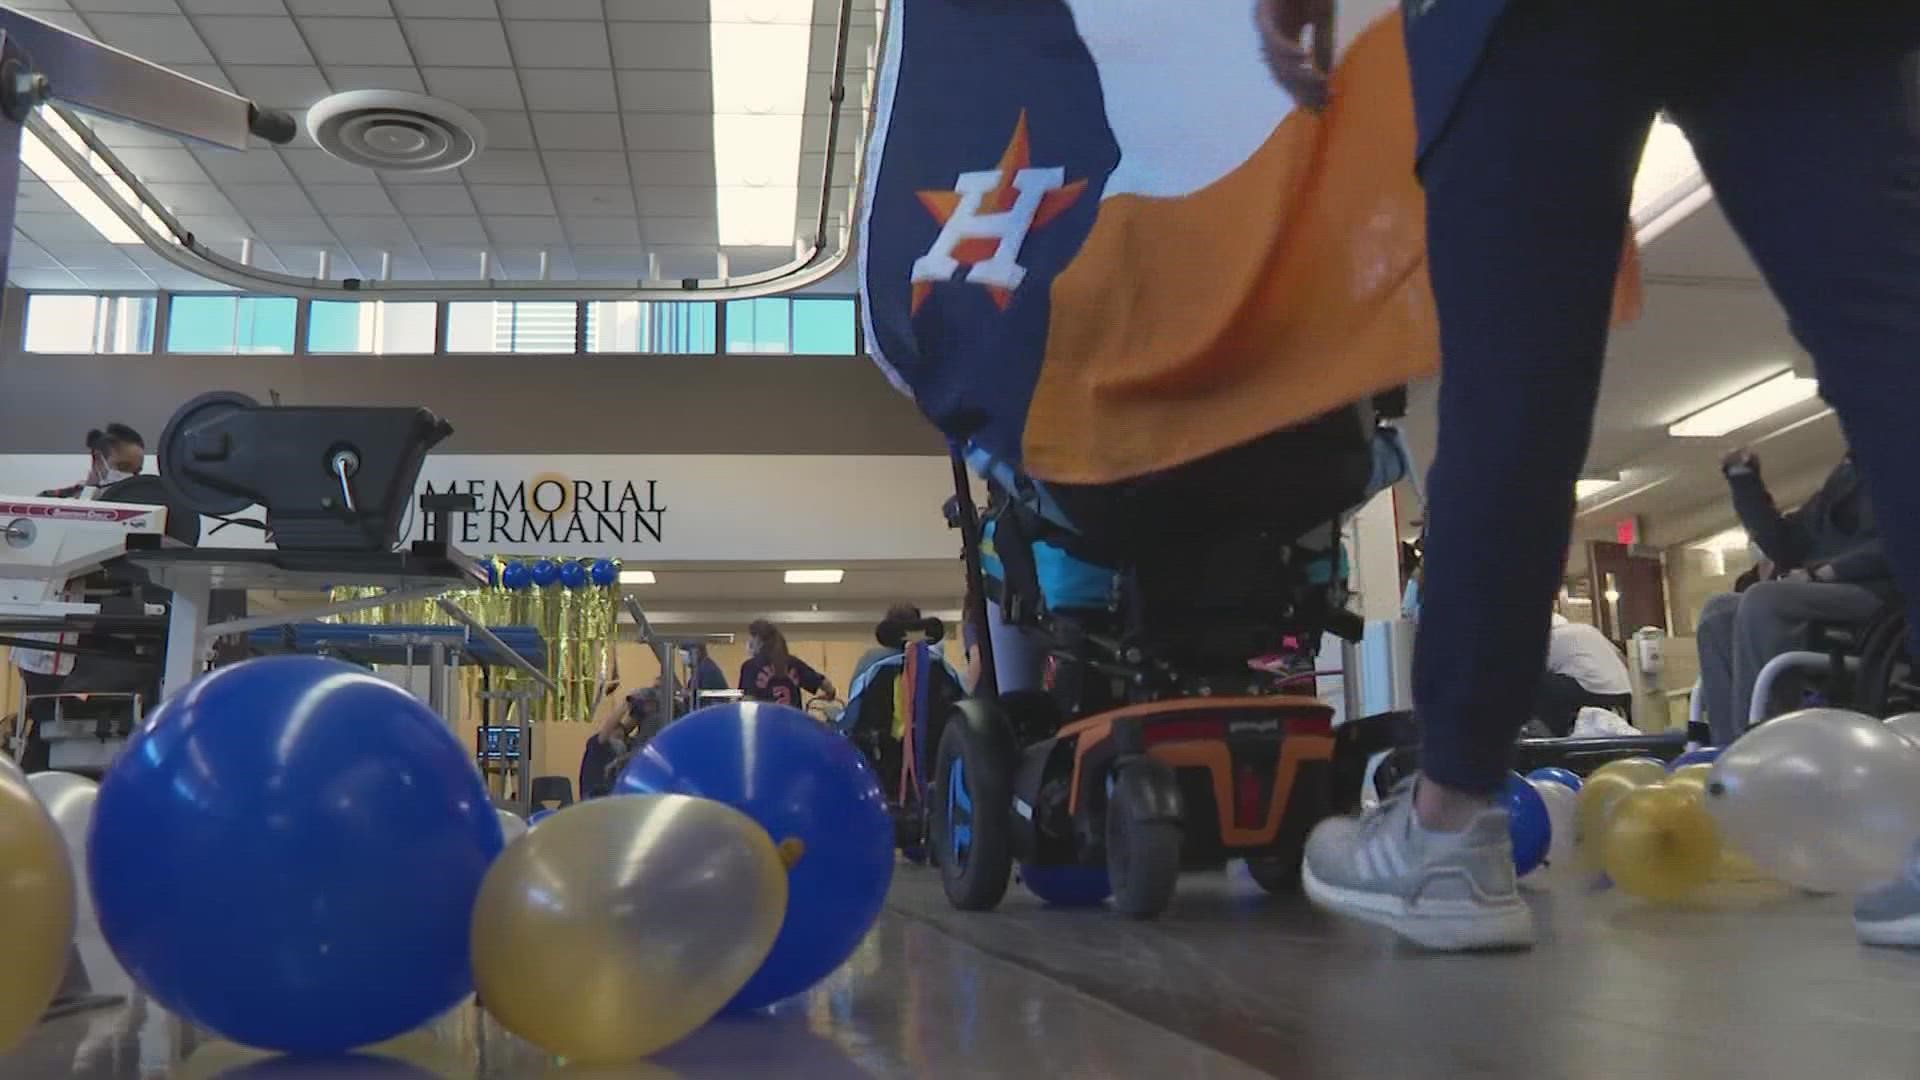 They might not have been able to be at the parade in person, but the rehabbing patients at TIRR Memorial Hermann found their own way to celebrate the championship.